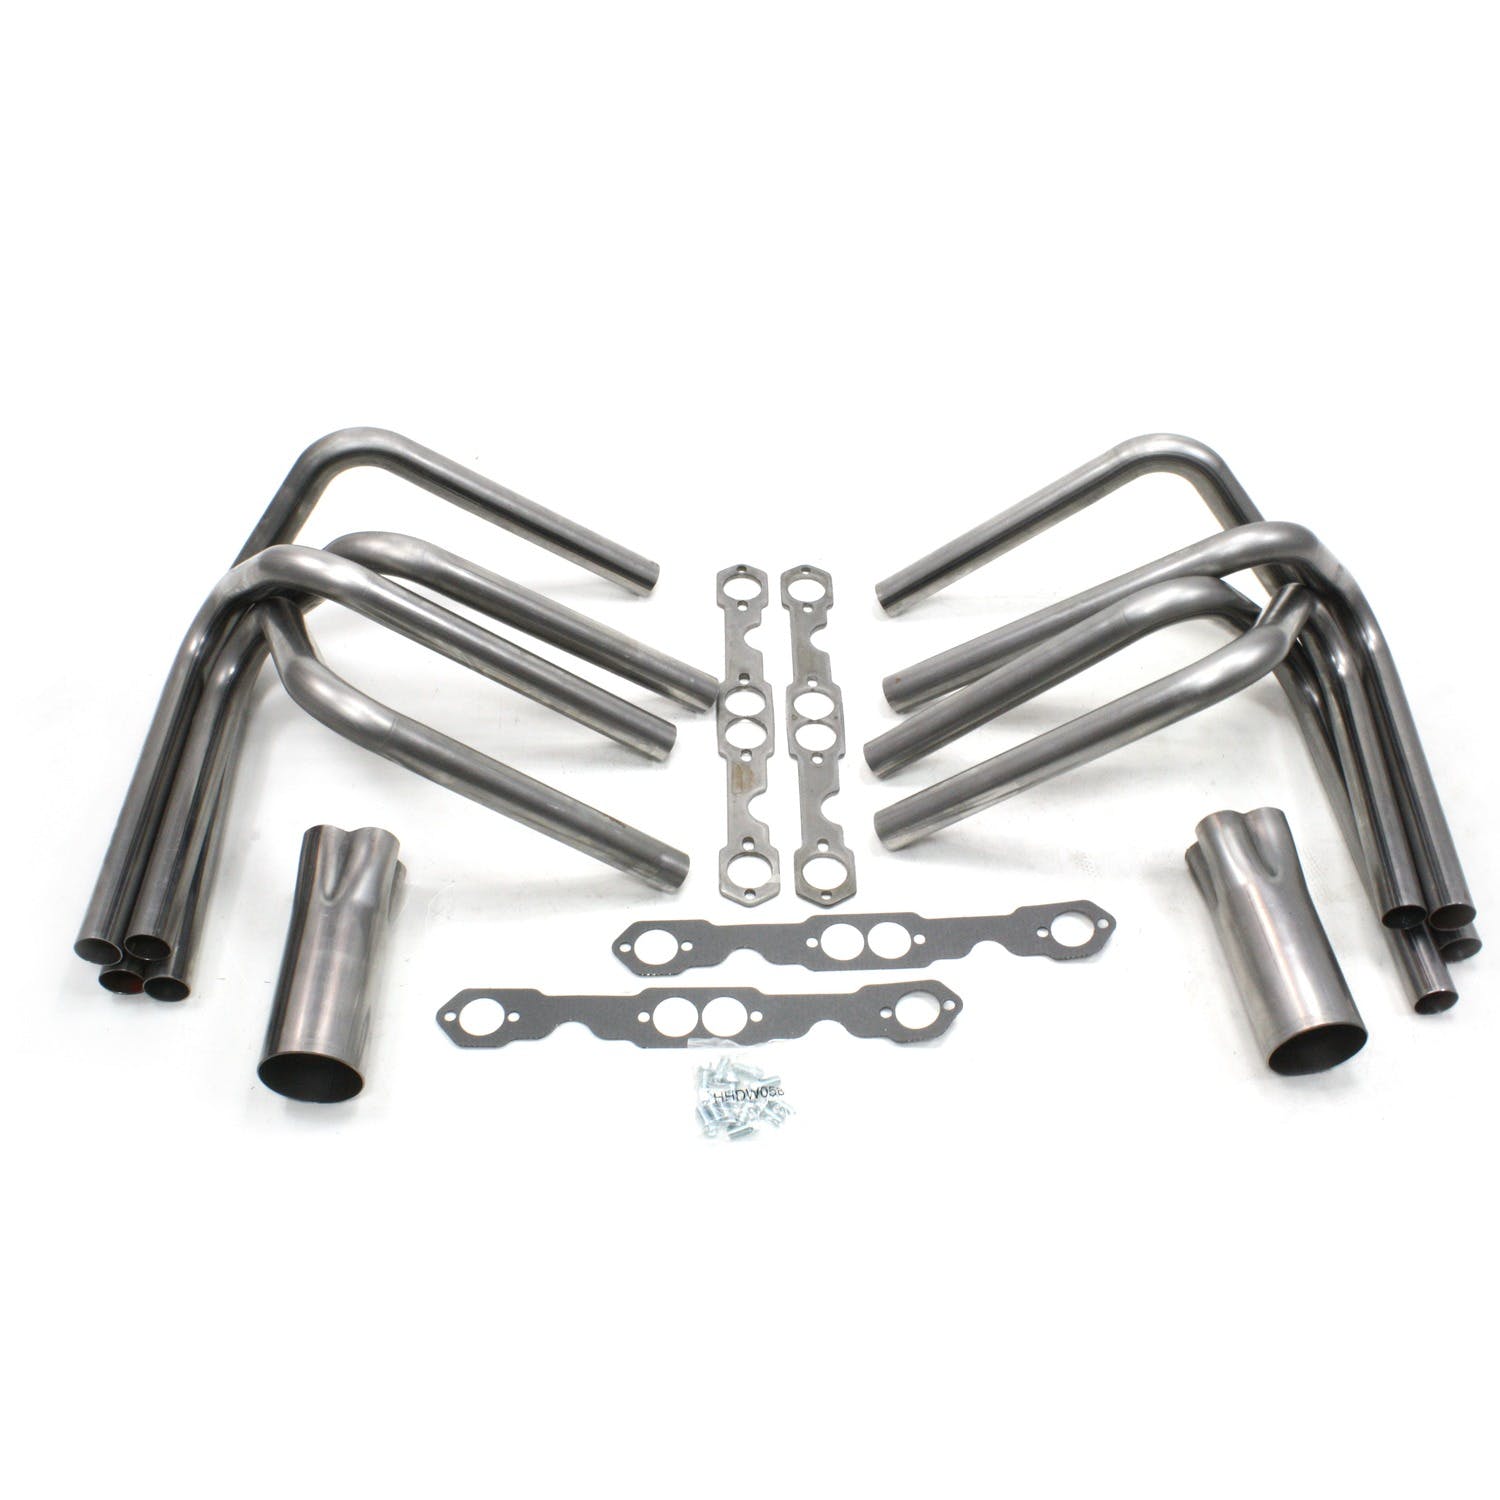 Patriot Exhaust H8007 Sprint Car Style SBC Weld Up Raw Steel